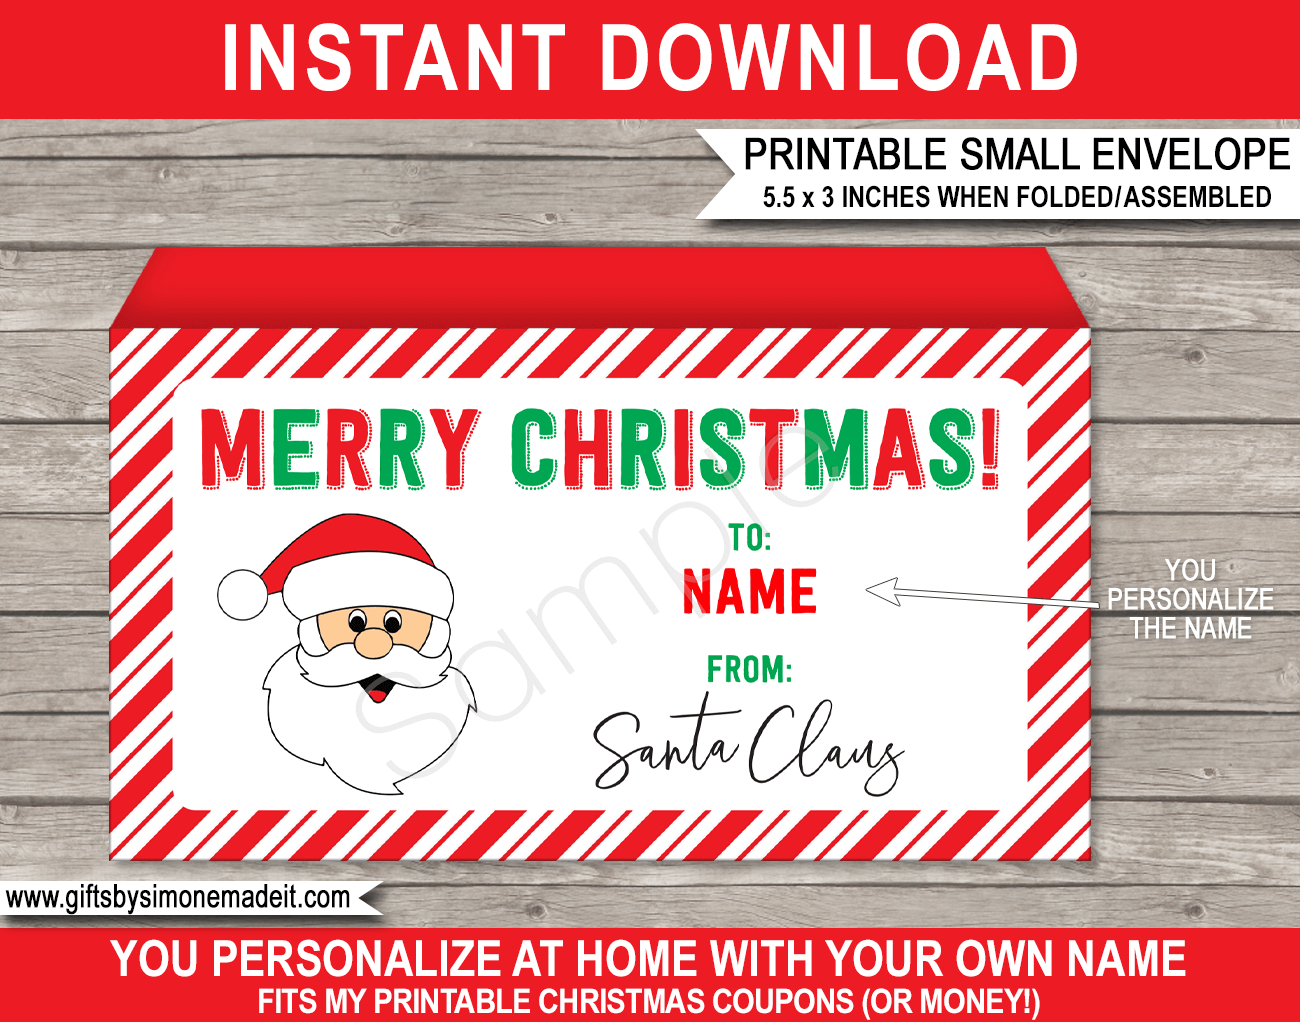 notes-from-santa-template-and-matching-printable-envelope-christmas